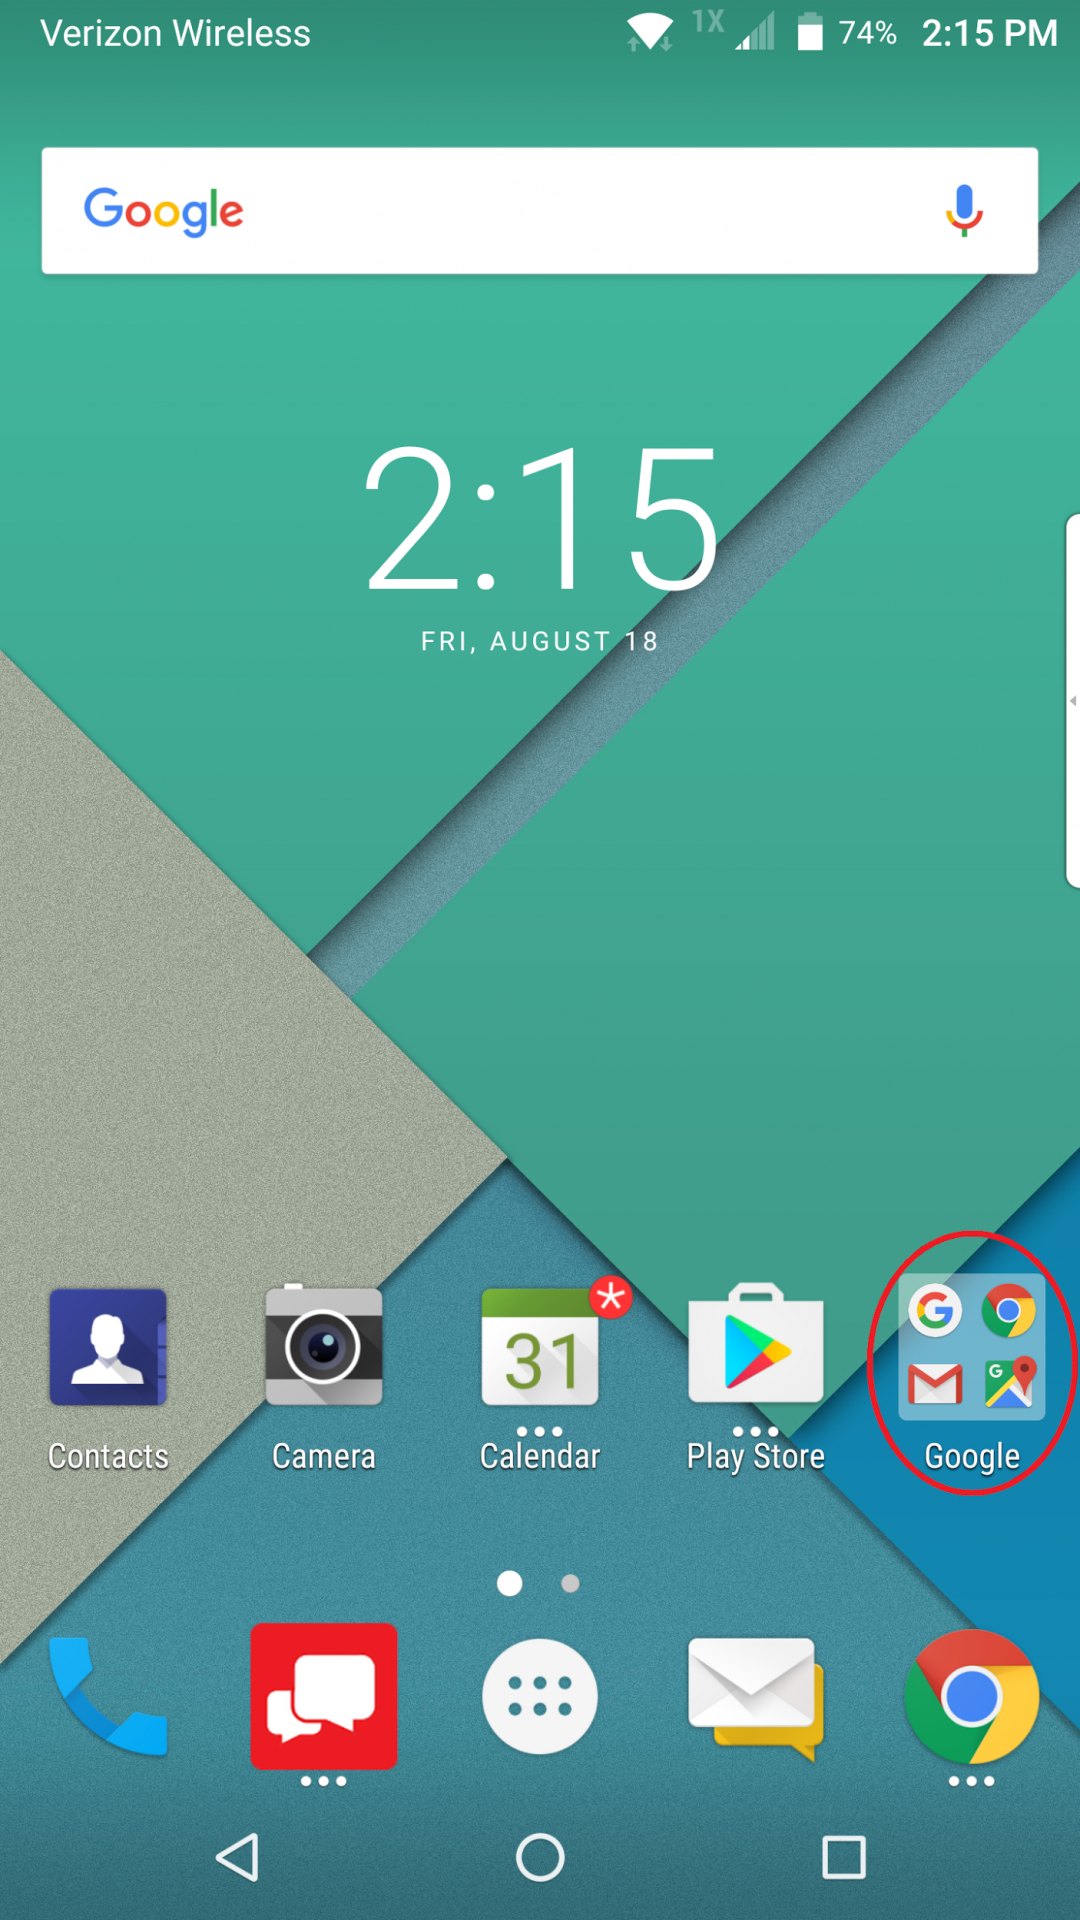 Blackberry homescreen with Google icon circled